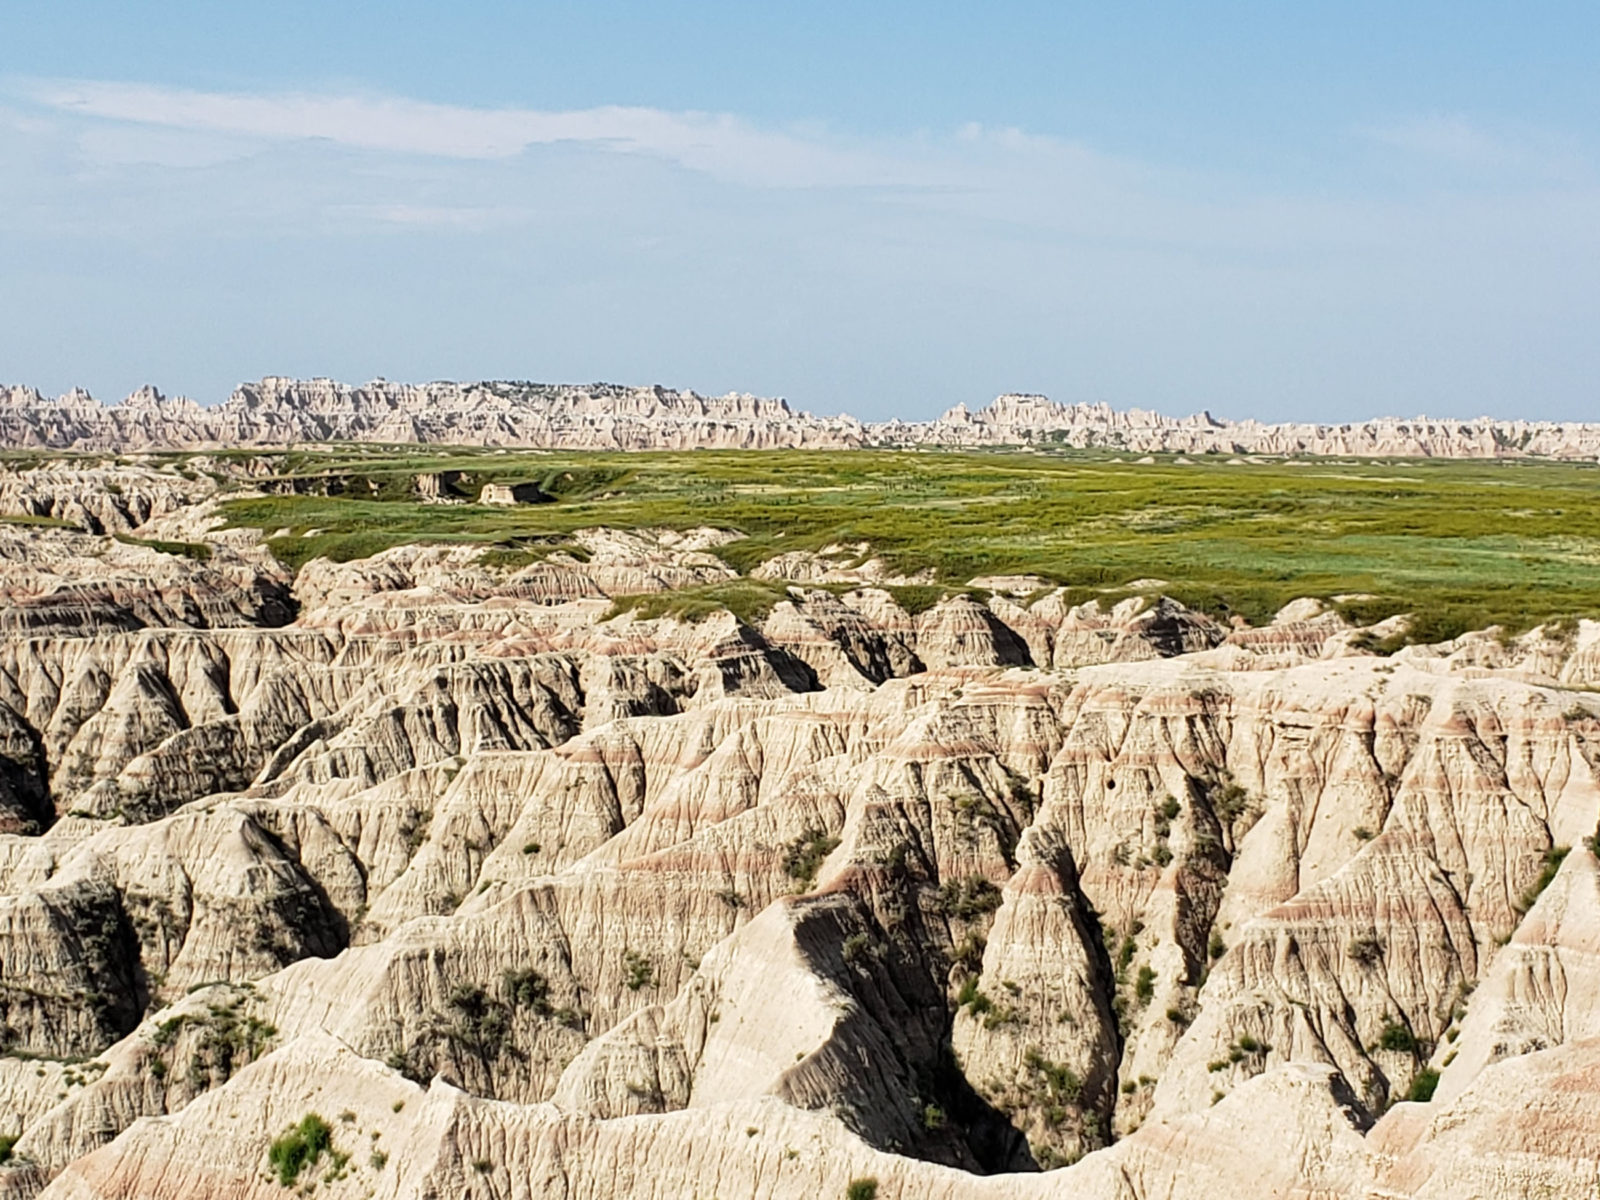 Badlands canyon and prairie